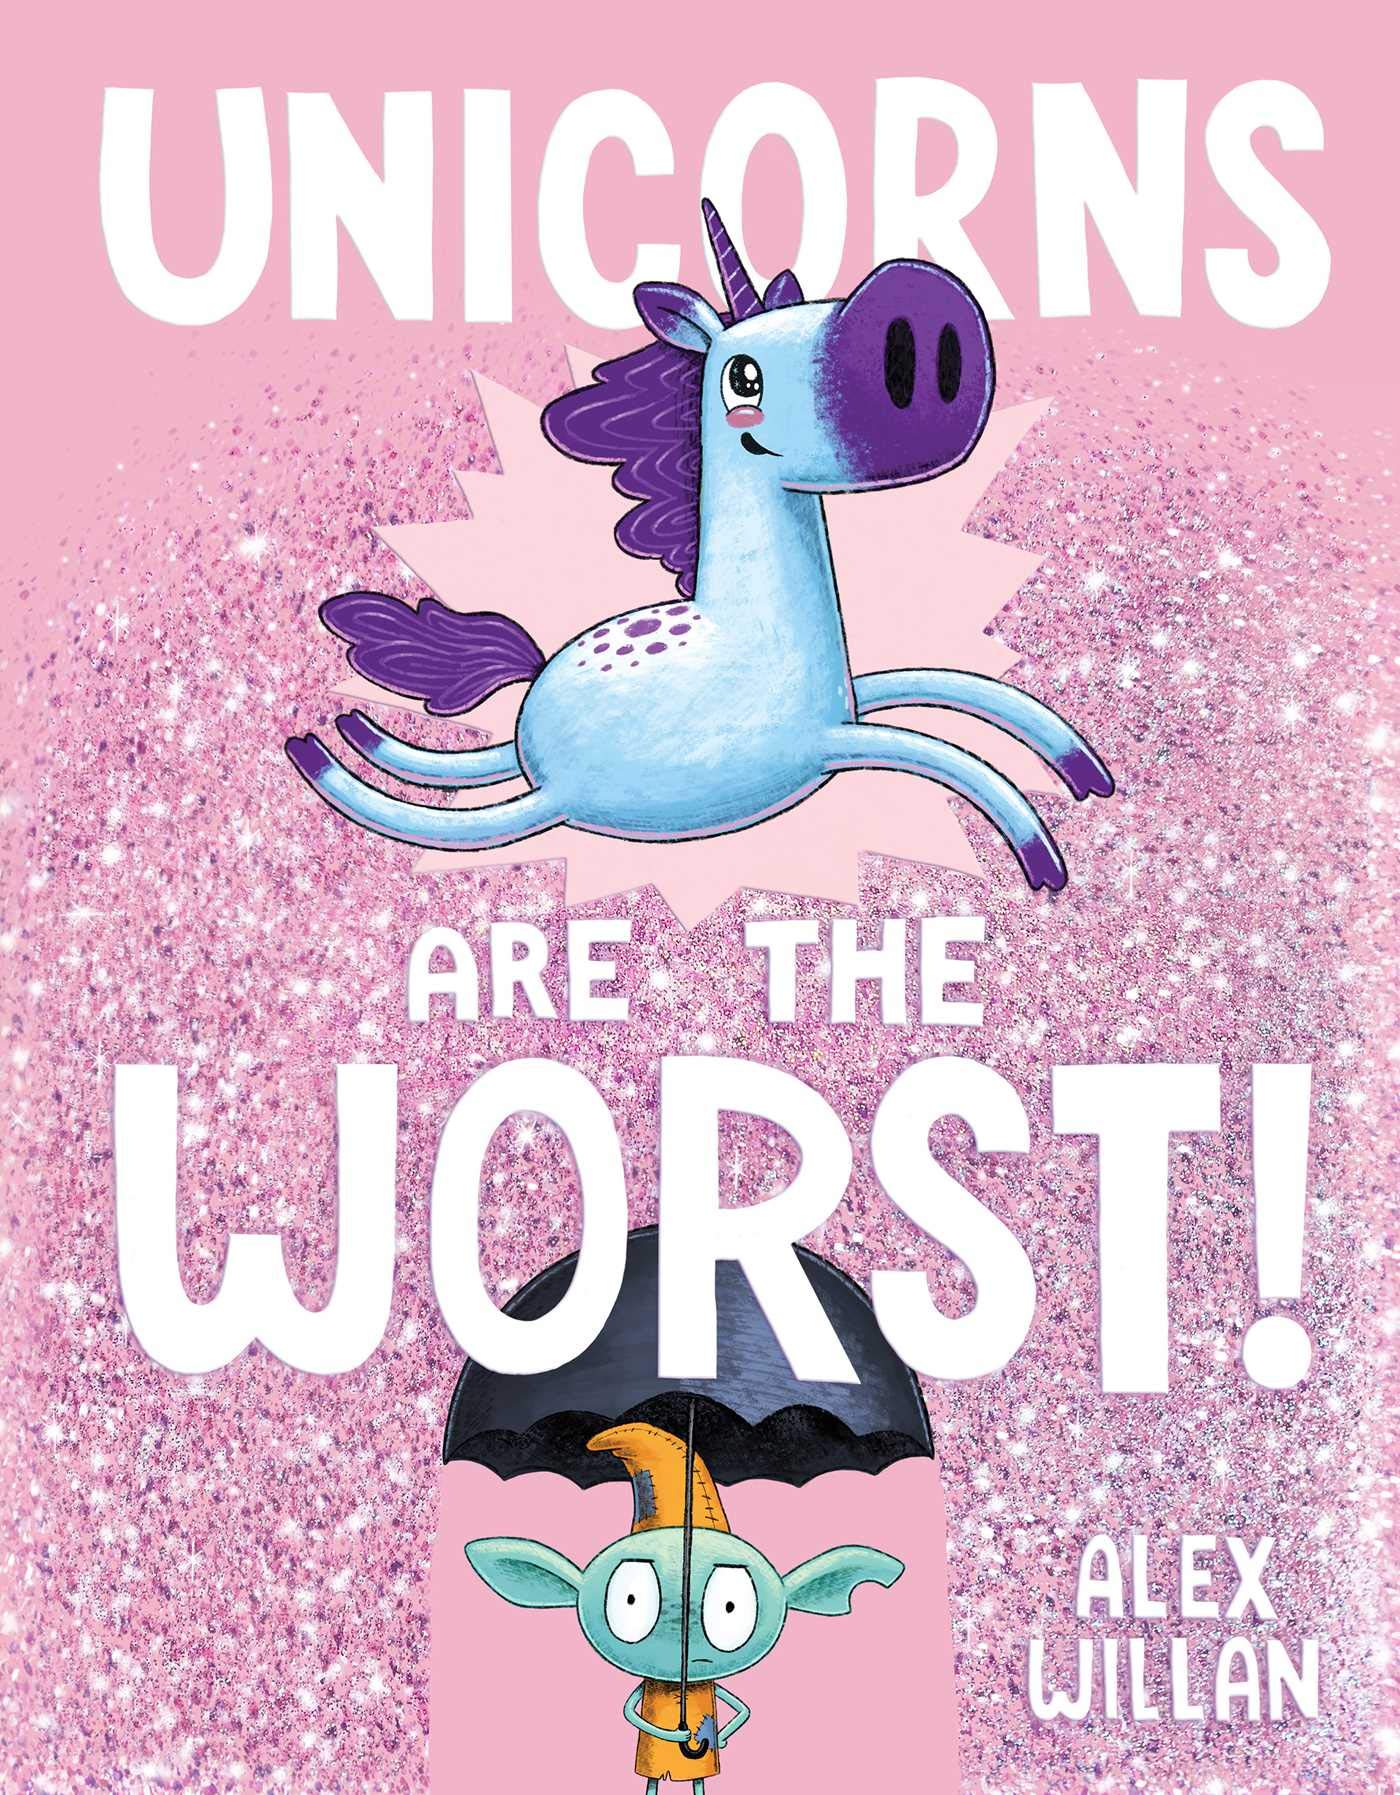 Image for "Unicorns are the Worst"